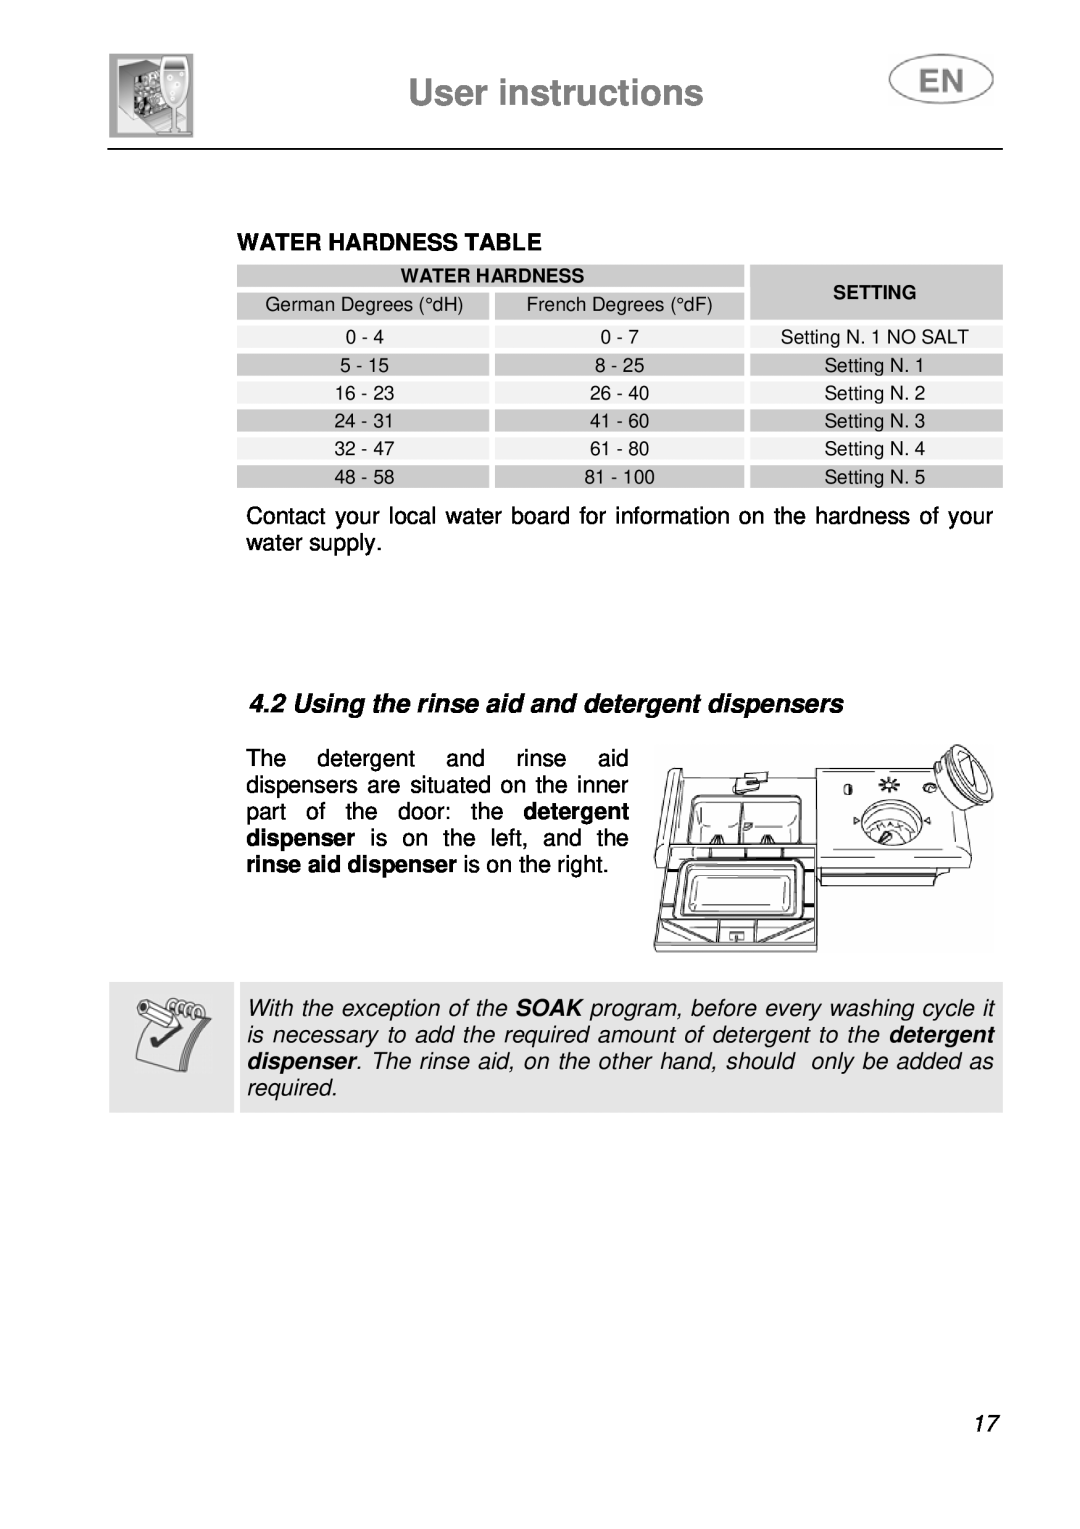 Smeg STA6248, STA6249 User instructions, Using the rinse aid and detergent dispensers, Water Hardness Table 